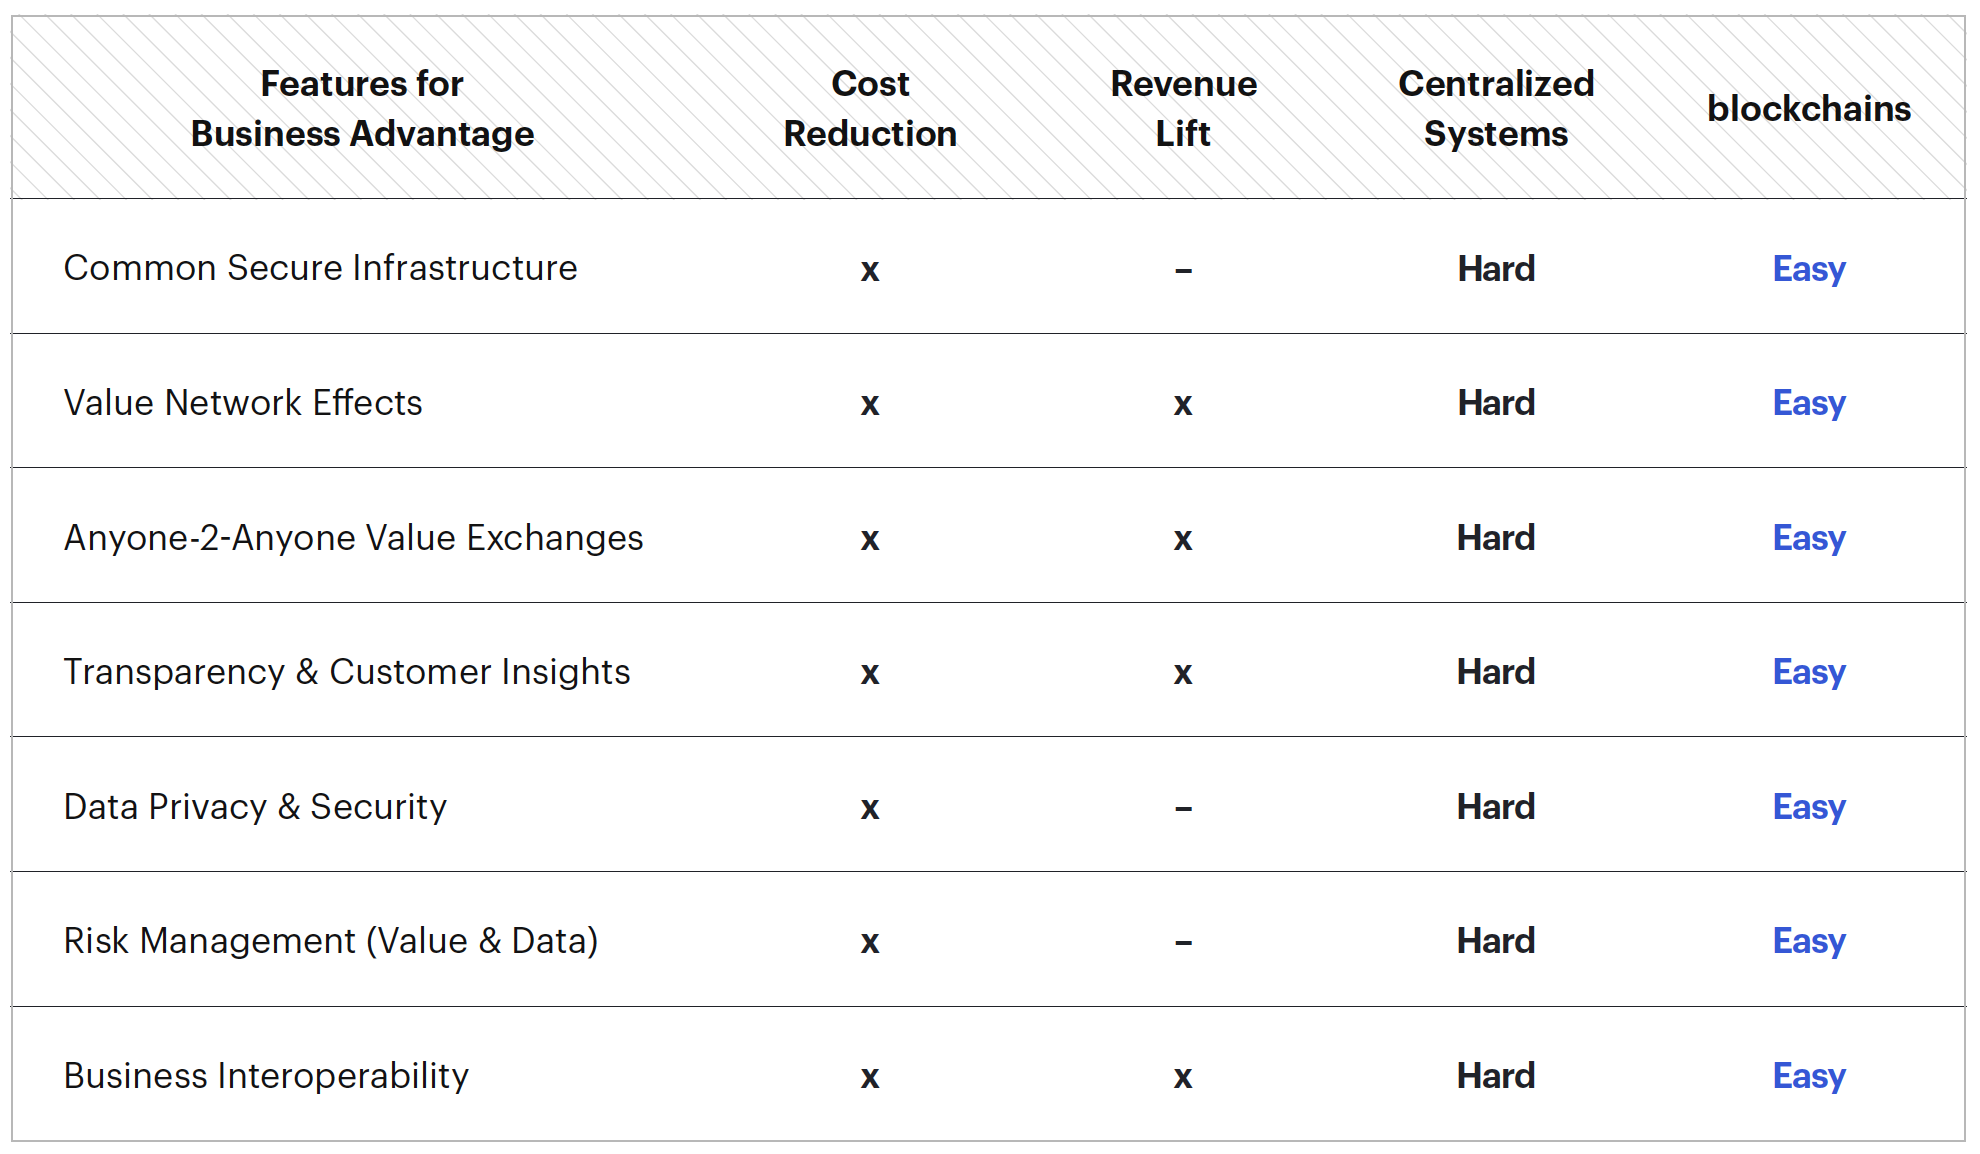 Table 1: Key Business Feature Comparison of Centralized Brand Systems vs. blockchain Infrastructure